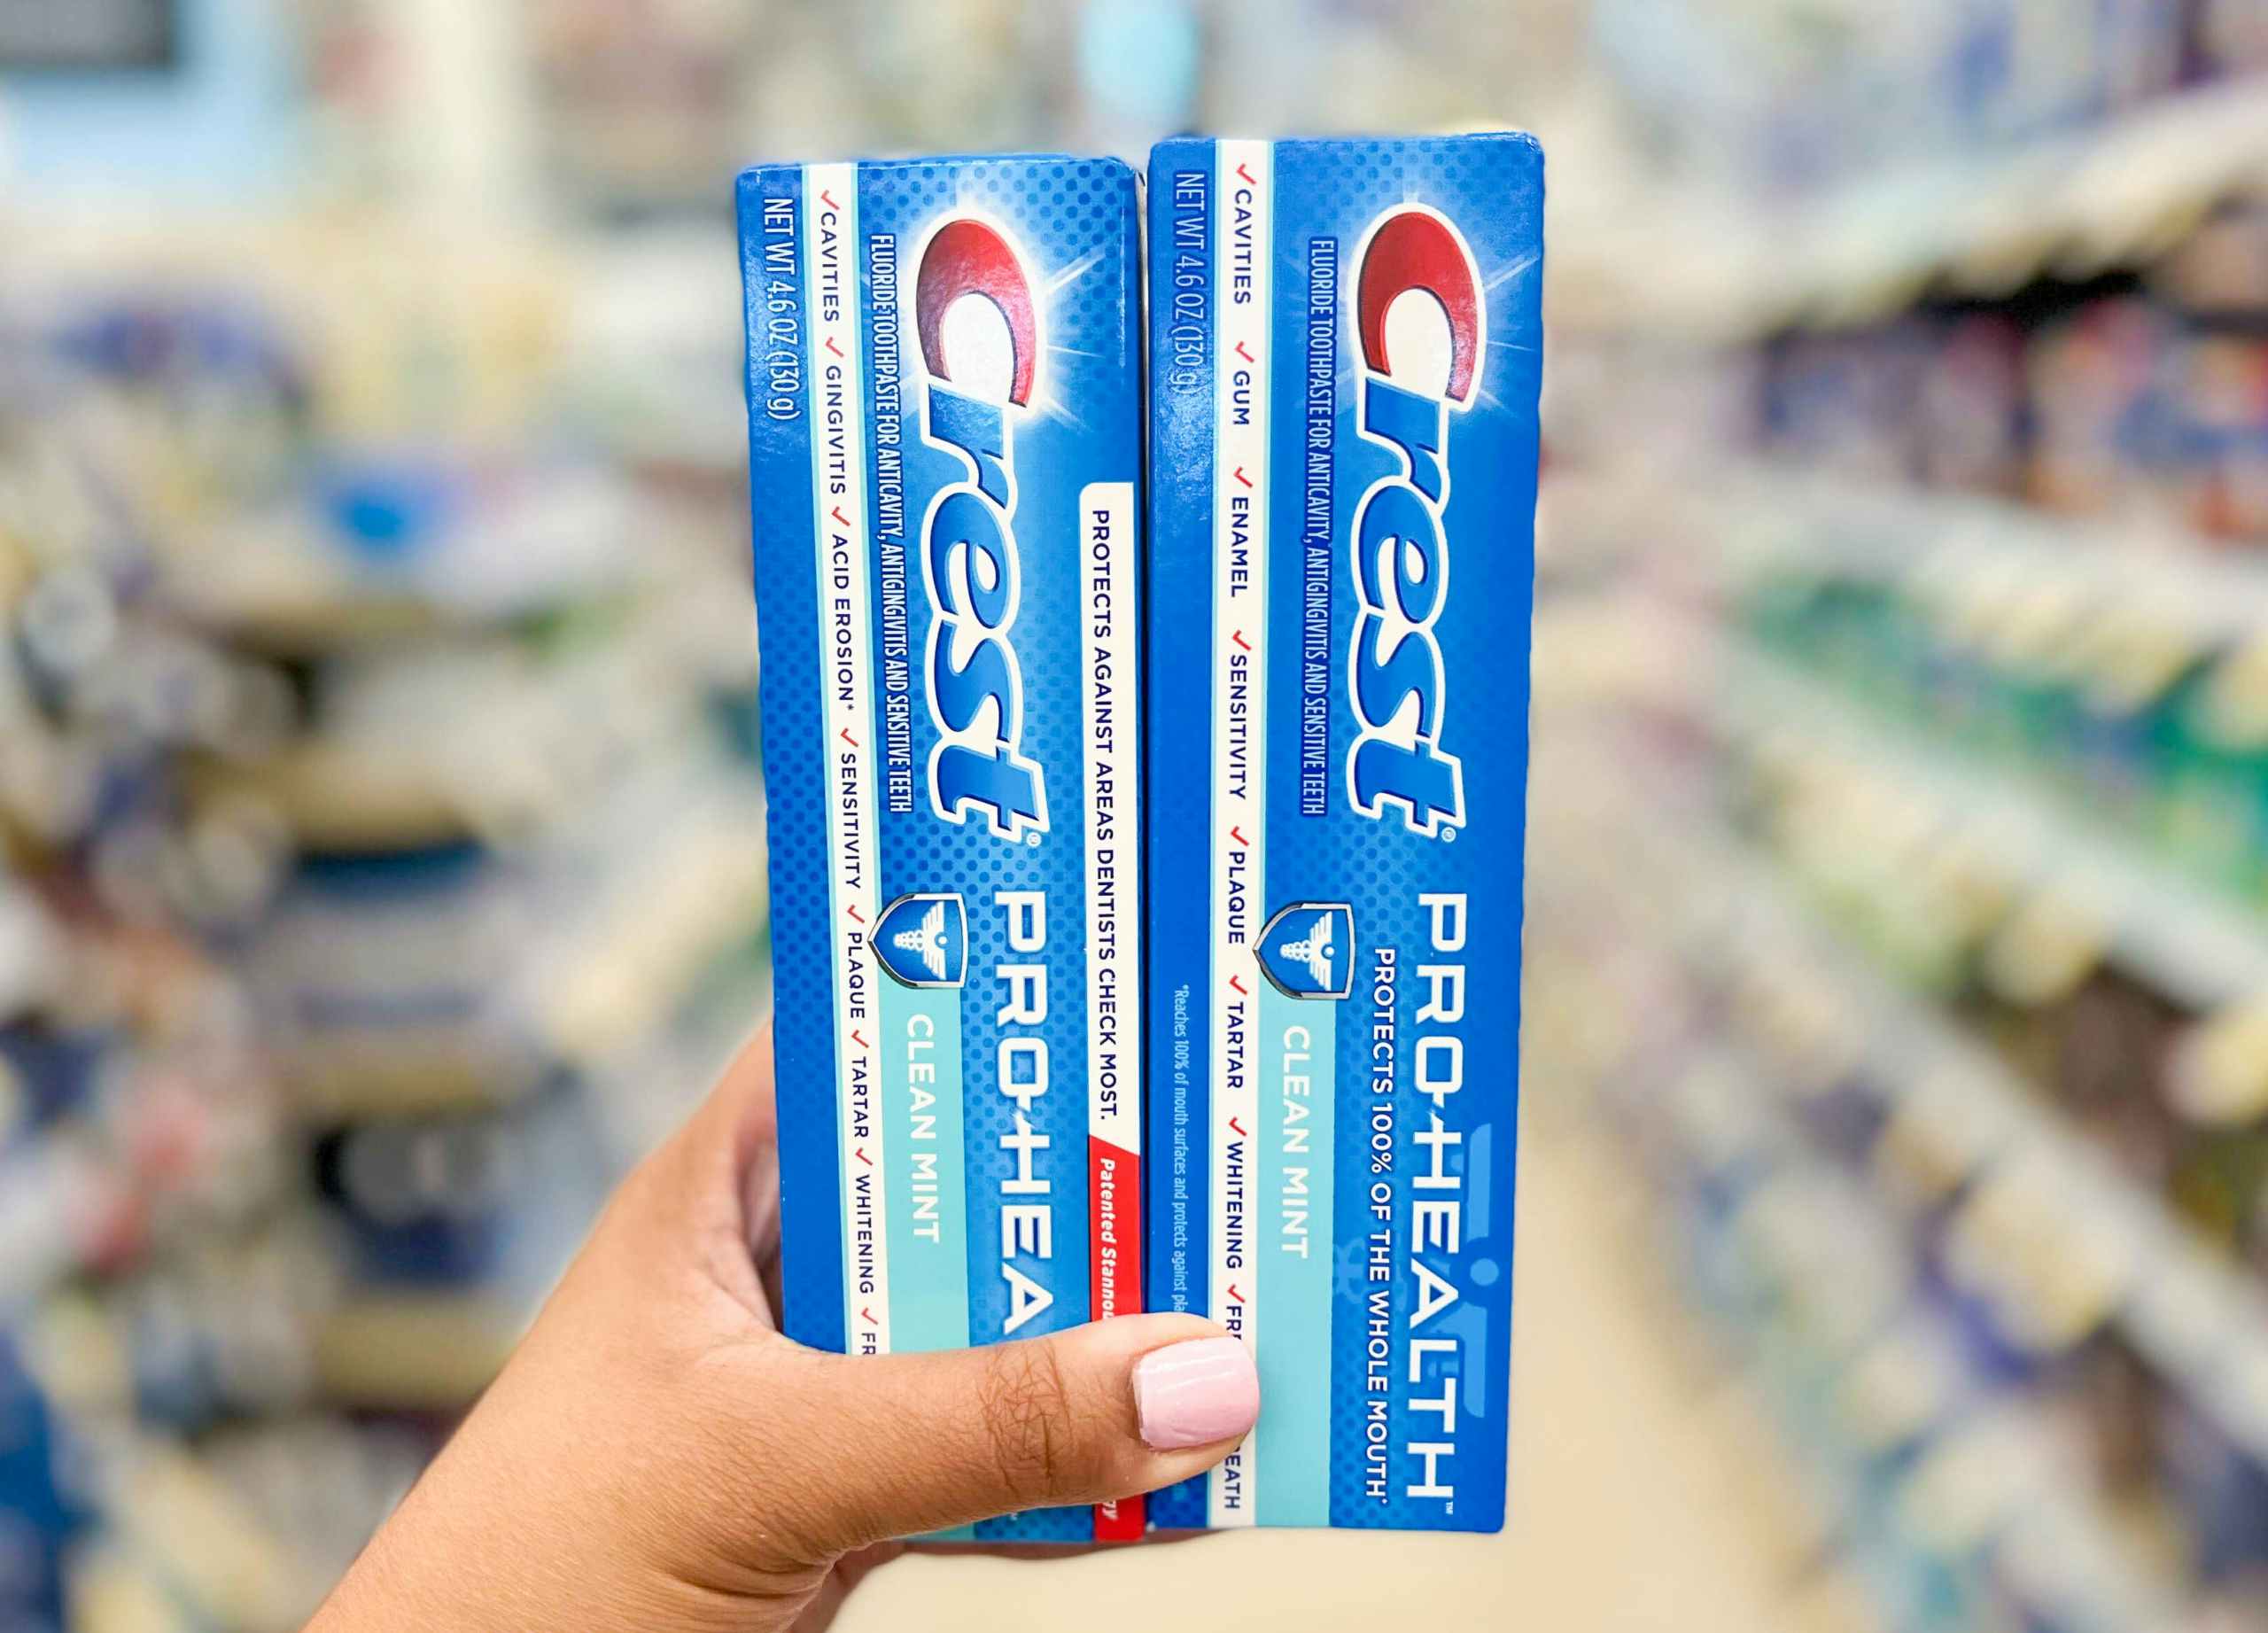 Hand holding two boxes of Crest Pro-Health toothpaste